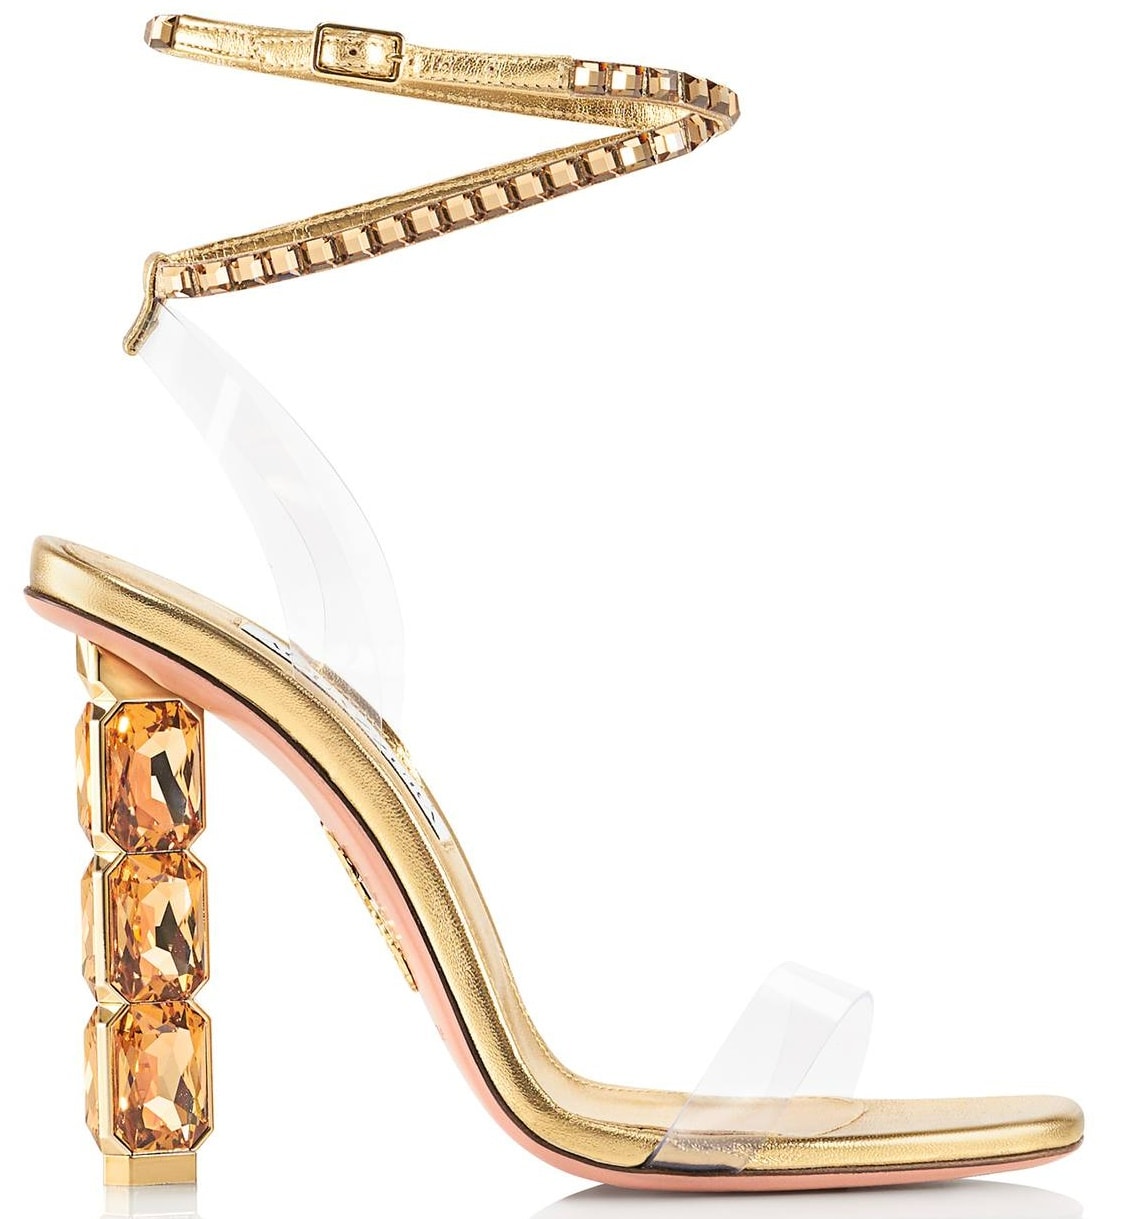 These sandals feature an open-toed design with statement heels and glittering ankle straps